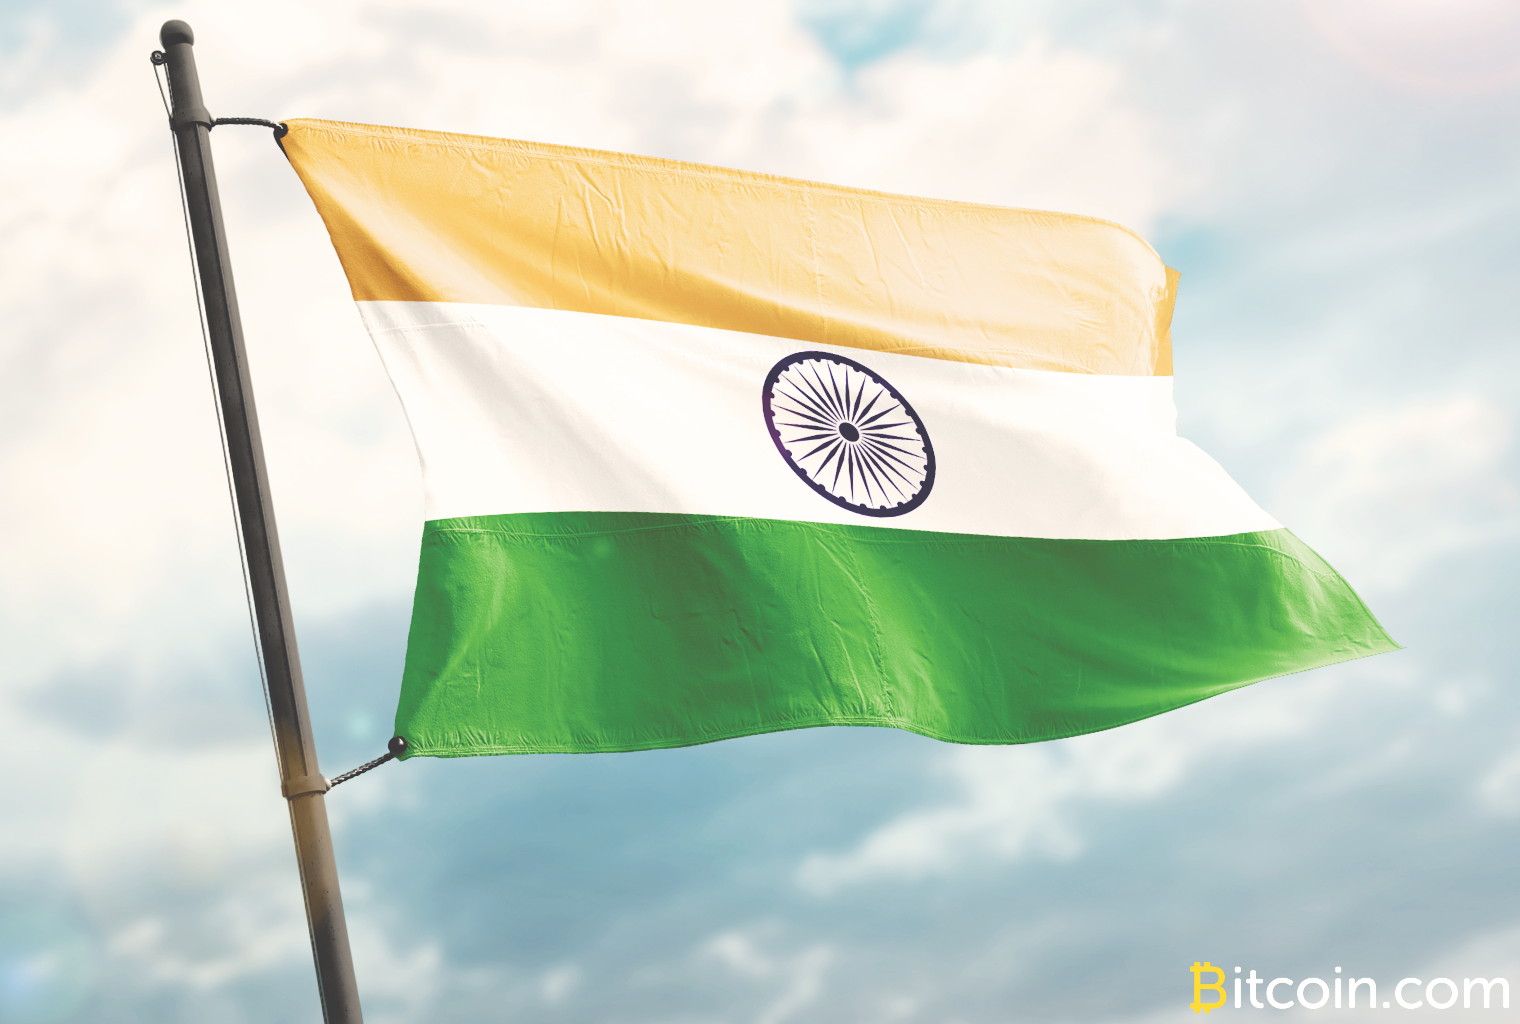 Crypto Ban In India Latest News - India's Supreme Court Keeps Ban on Banks' Crypto Services ... : The indian central bank had in 2018 banned crypto transactions after a string of frauds in the months following prime minister narendra mod's sudden decision to ban 80% of the nation's currency.